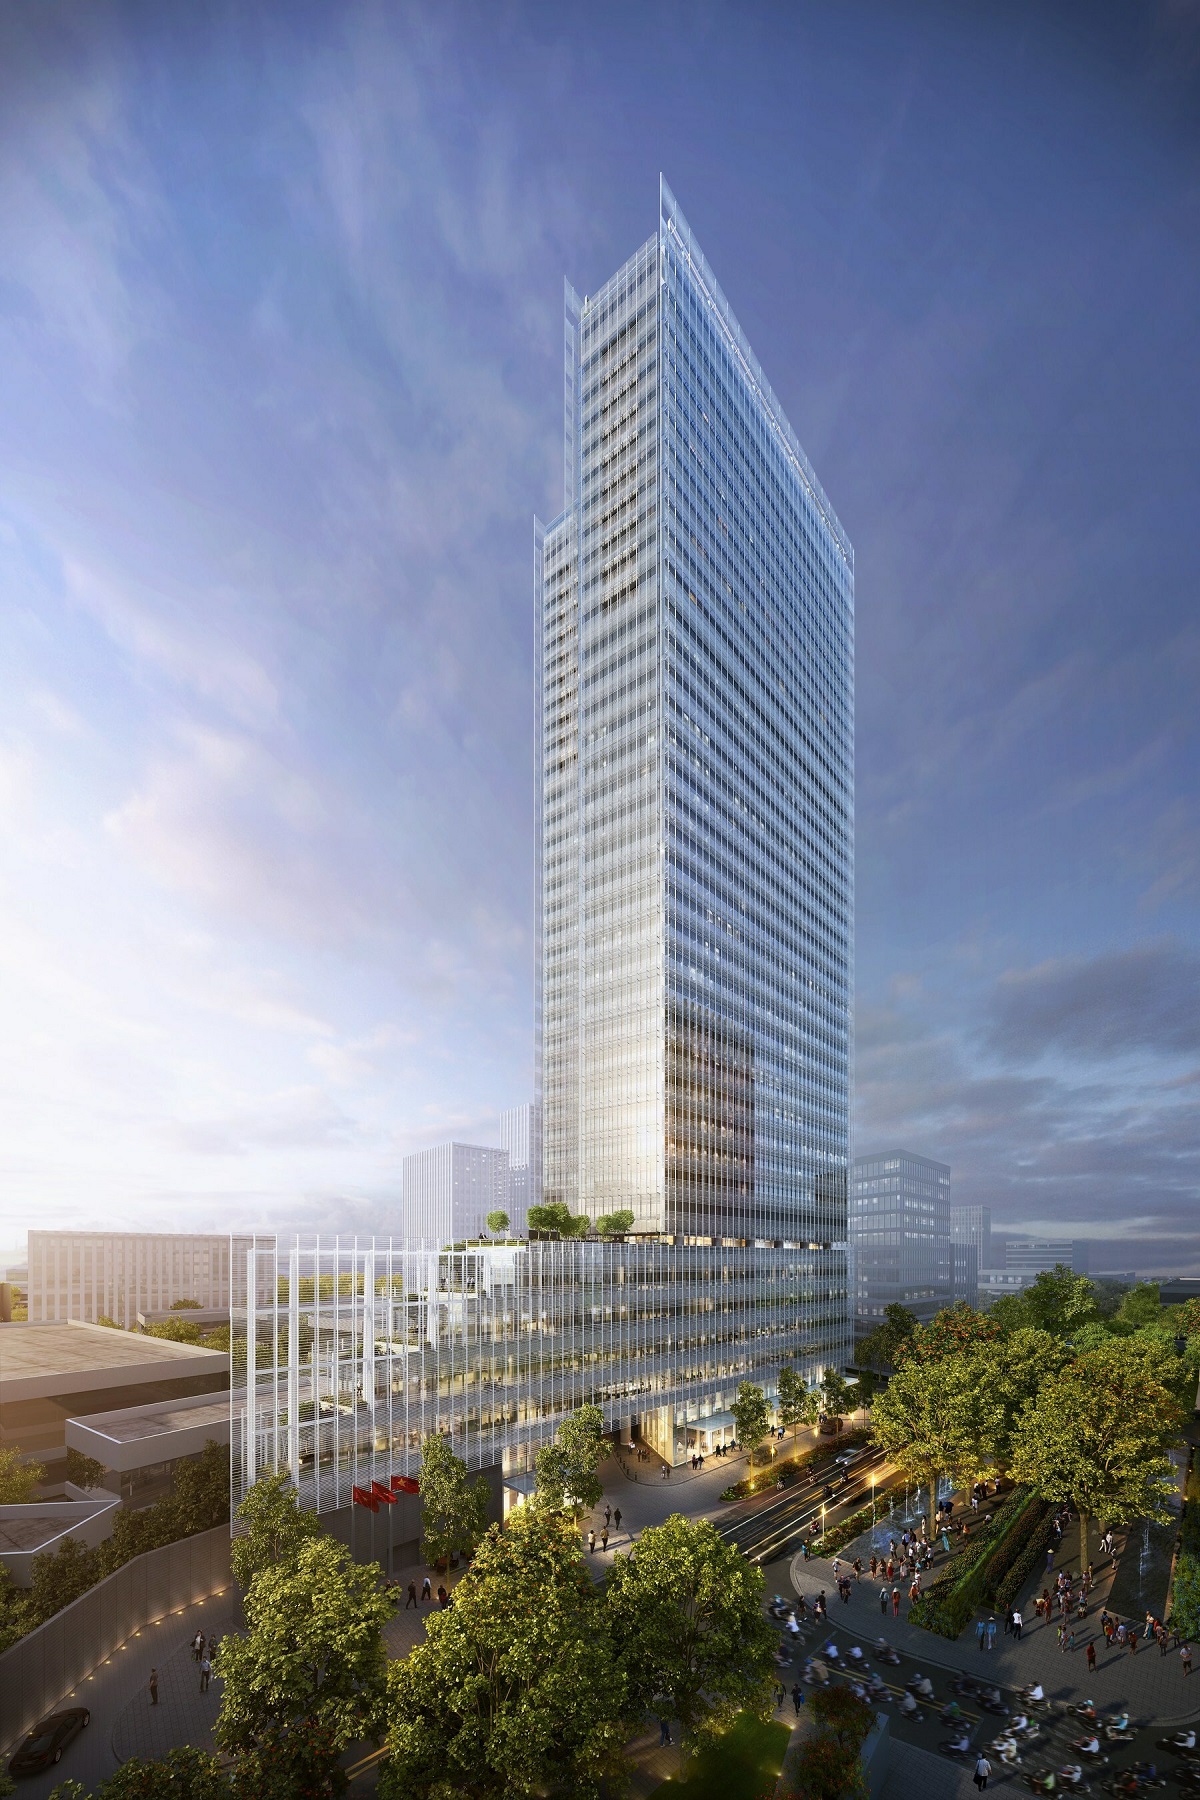 A large glass-fronted high-rise building render of what the new Nobu Hotel and mixed-use building in Ho Chi Minh City will look like once completed in 2026.